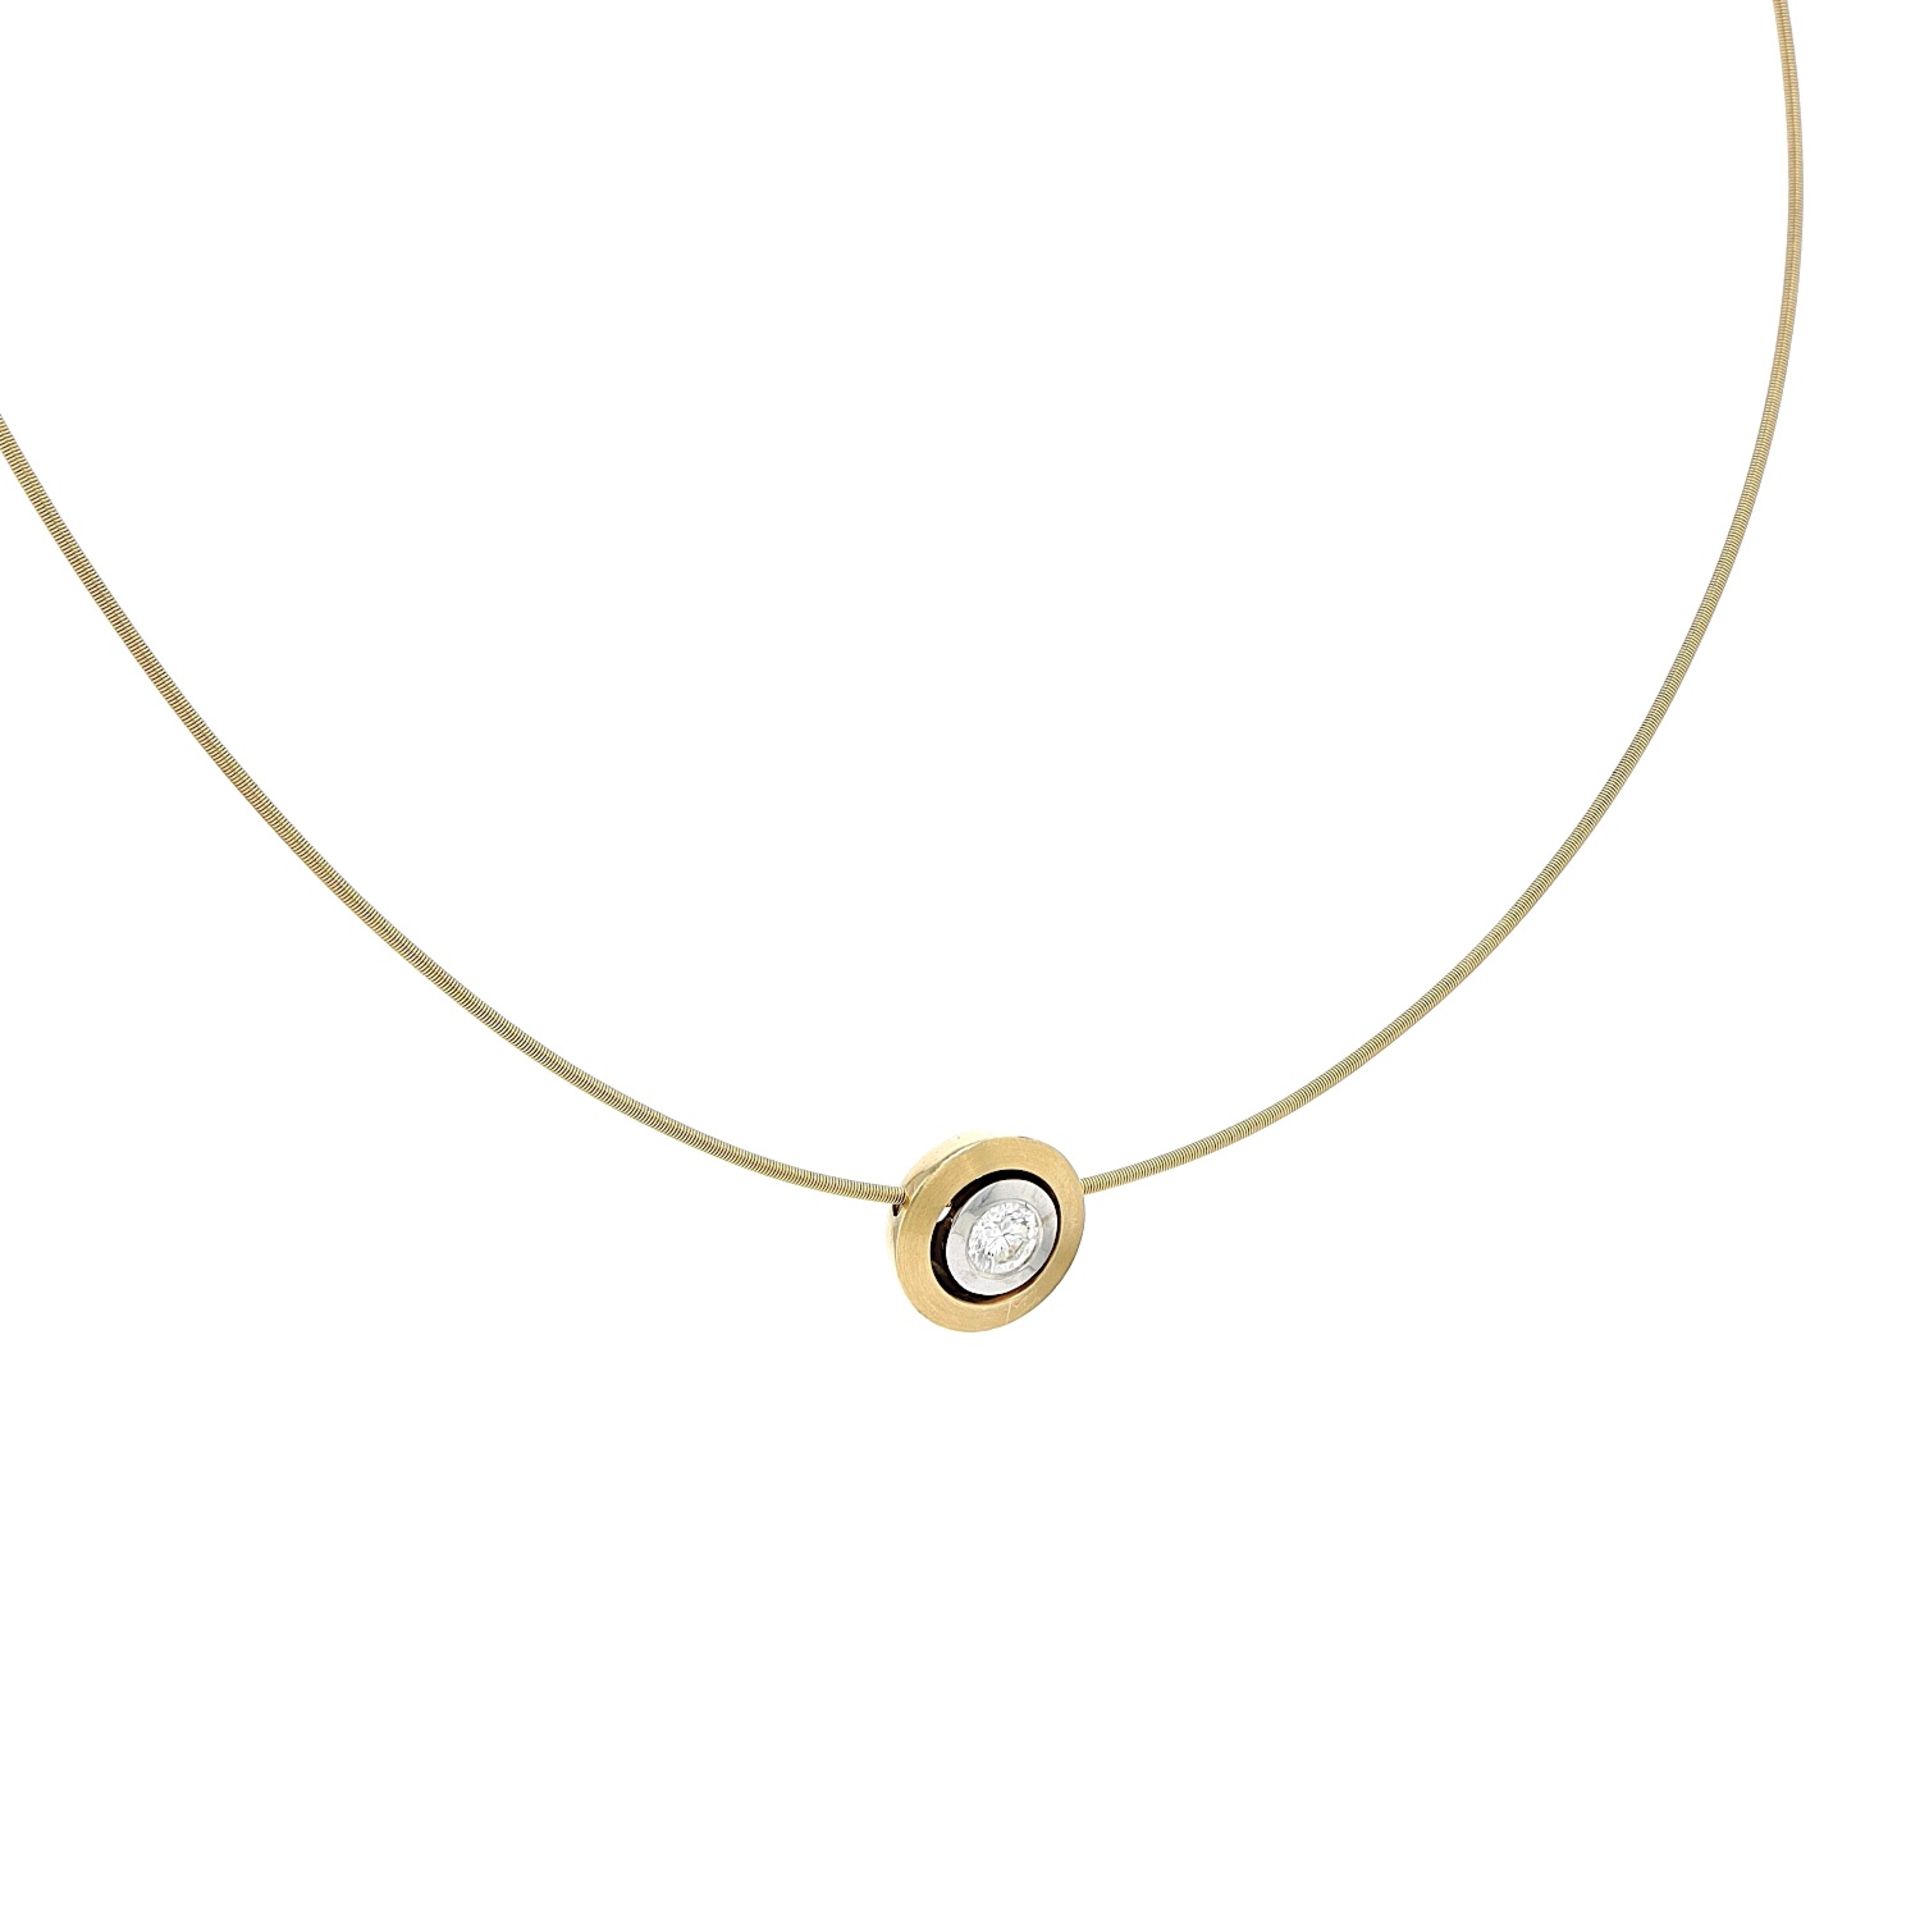 Necklace 750 gold Niessing, pendant with brilliant - Image 3 of 7